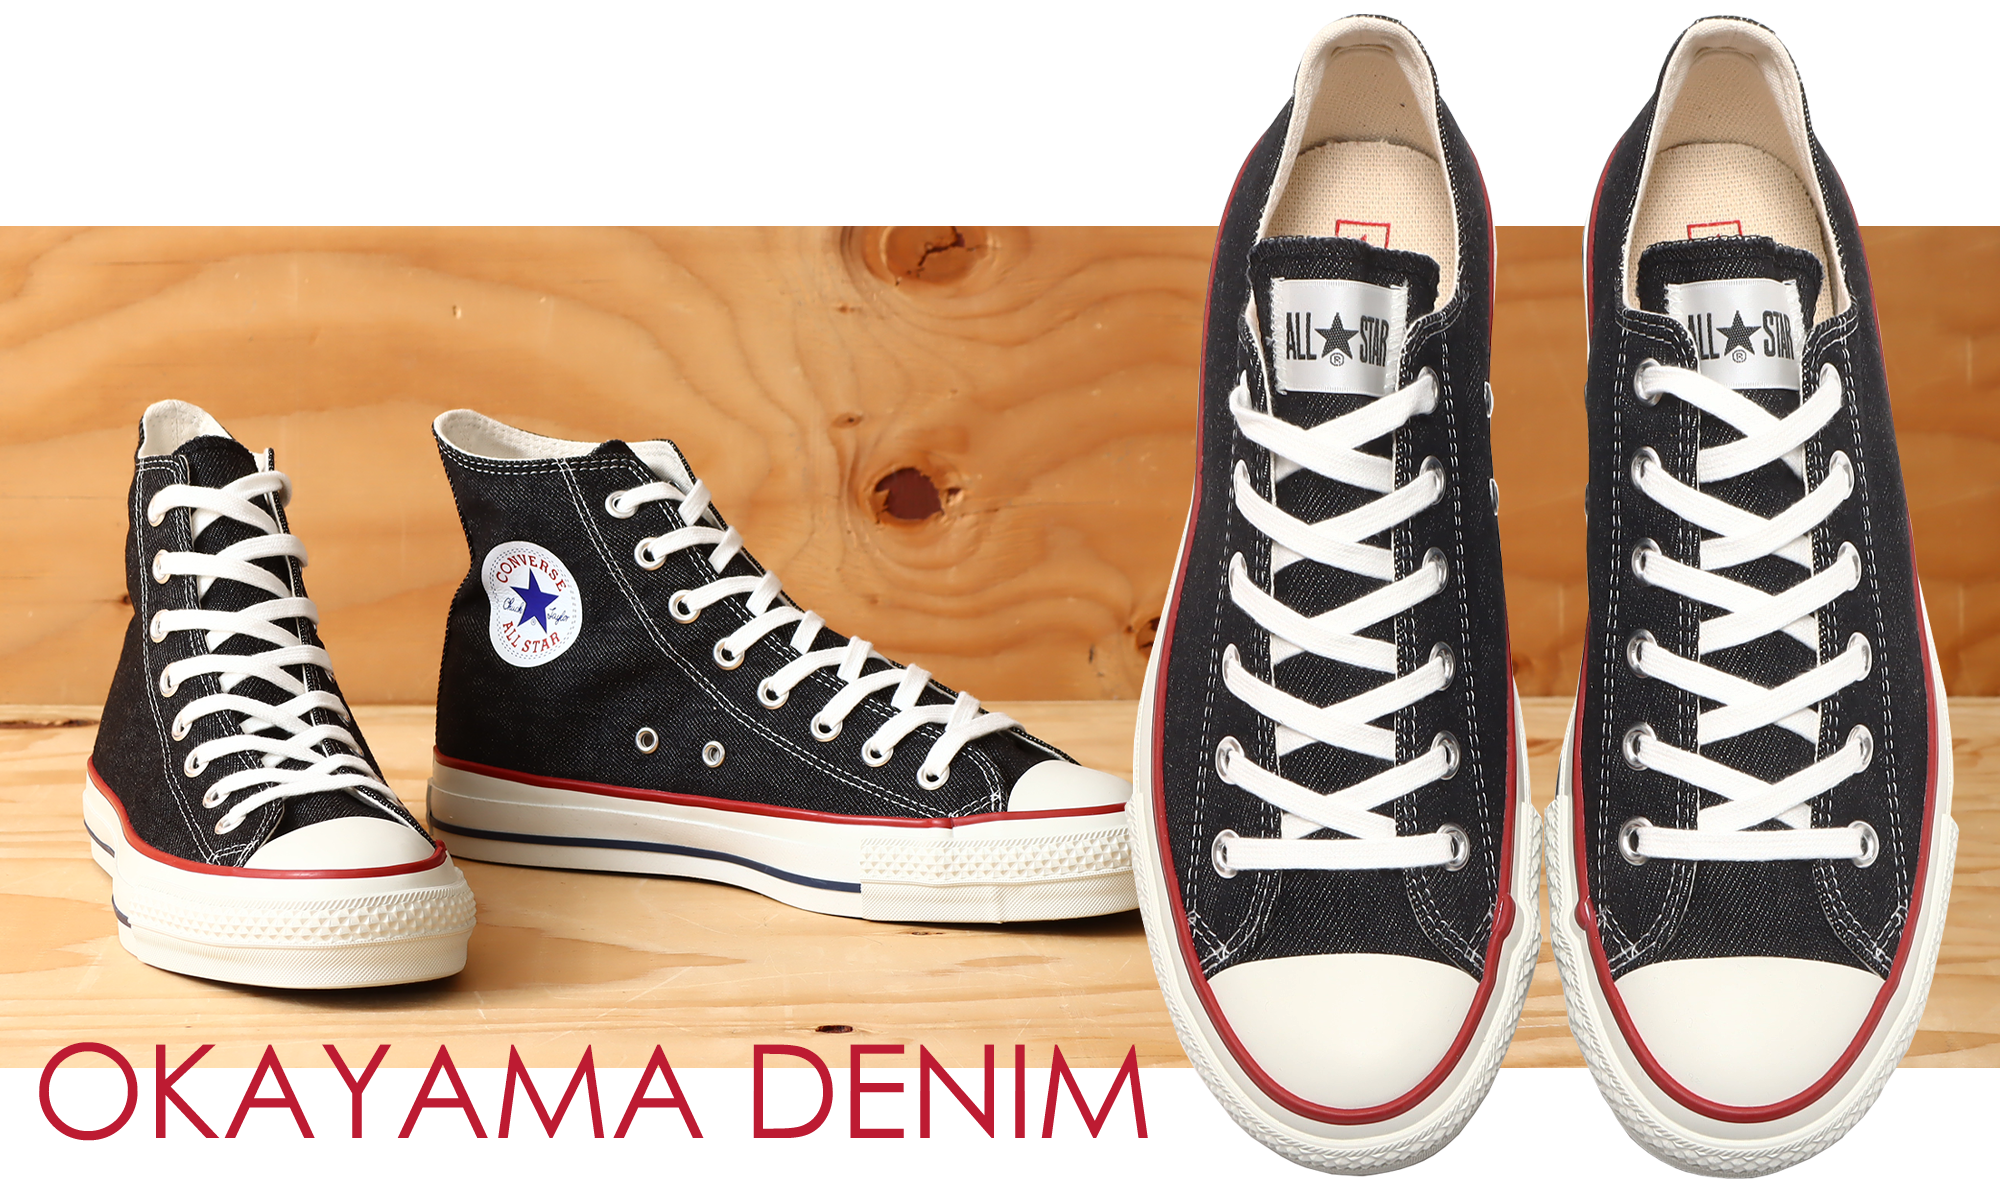 Converse all star made in Japan デニム - スニーカー